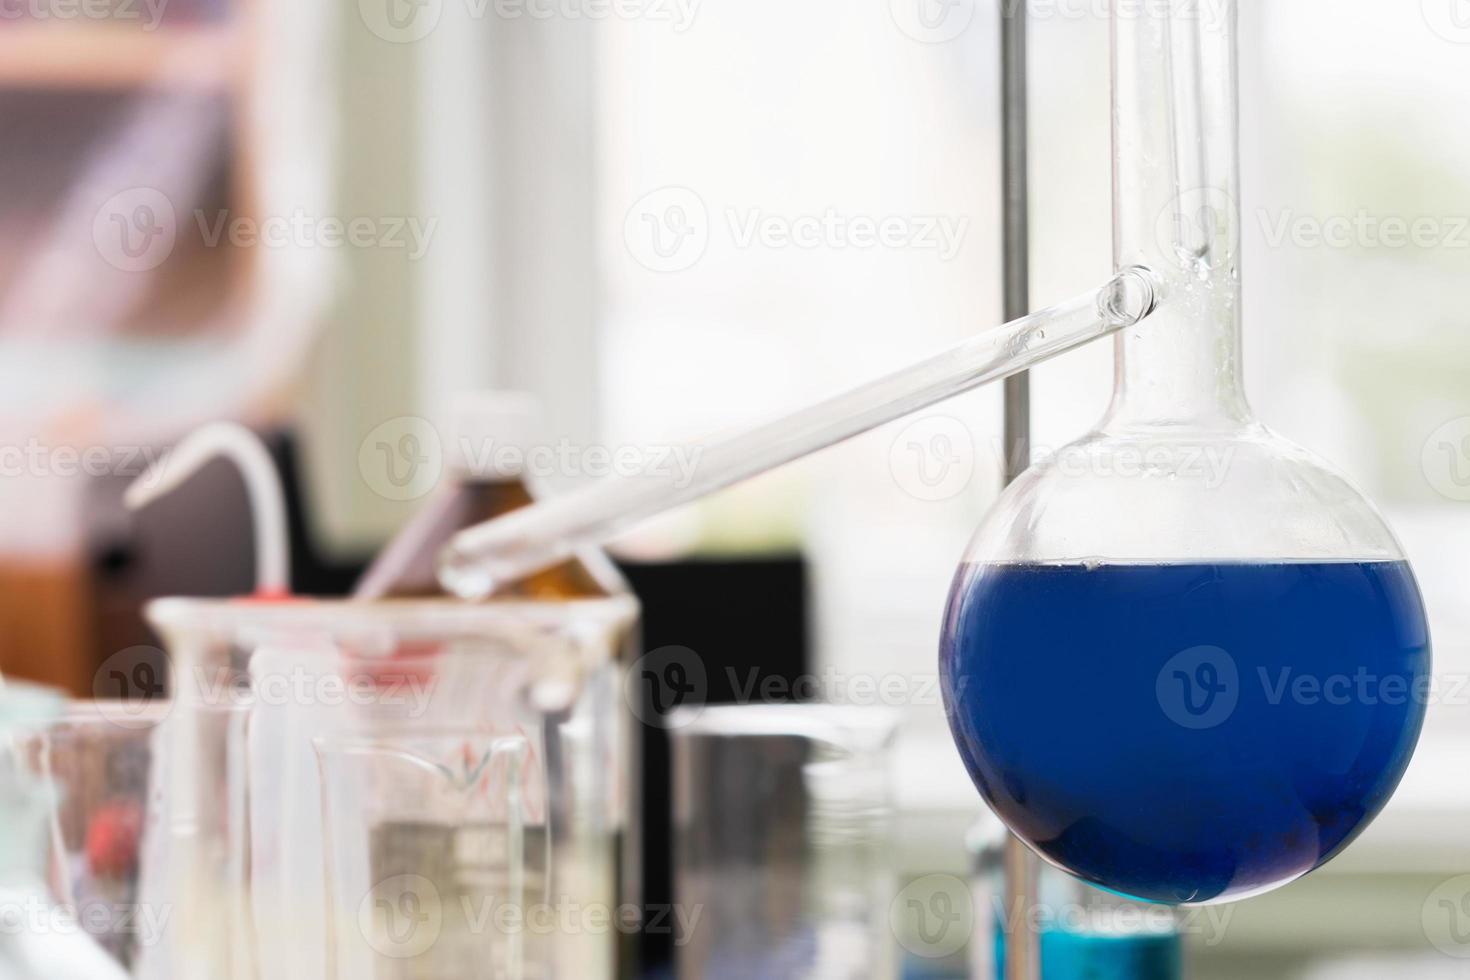 Retort flask filled with a blue substance in a laboratory photo